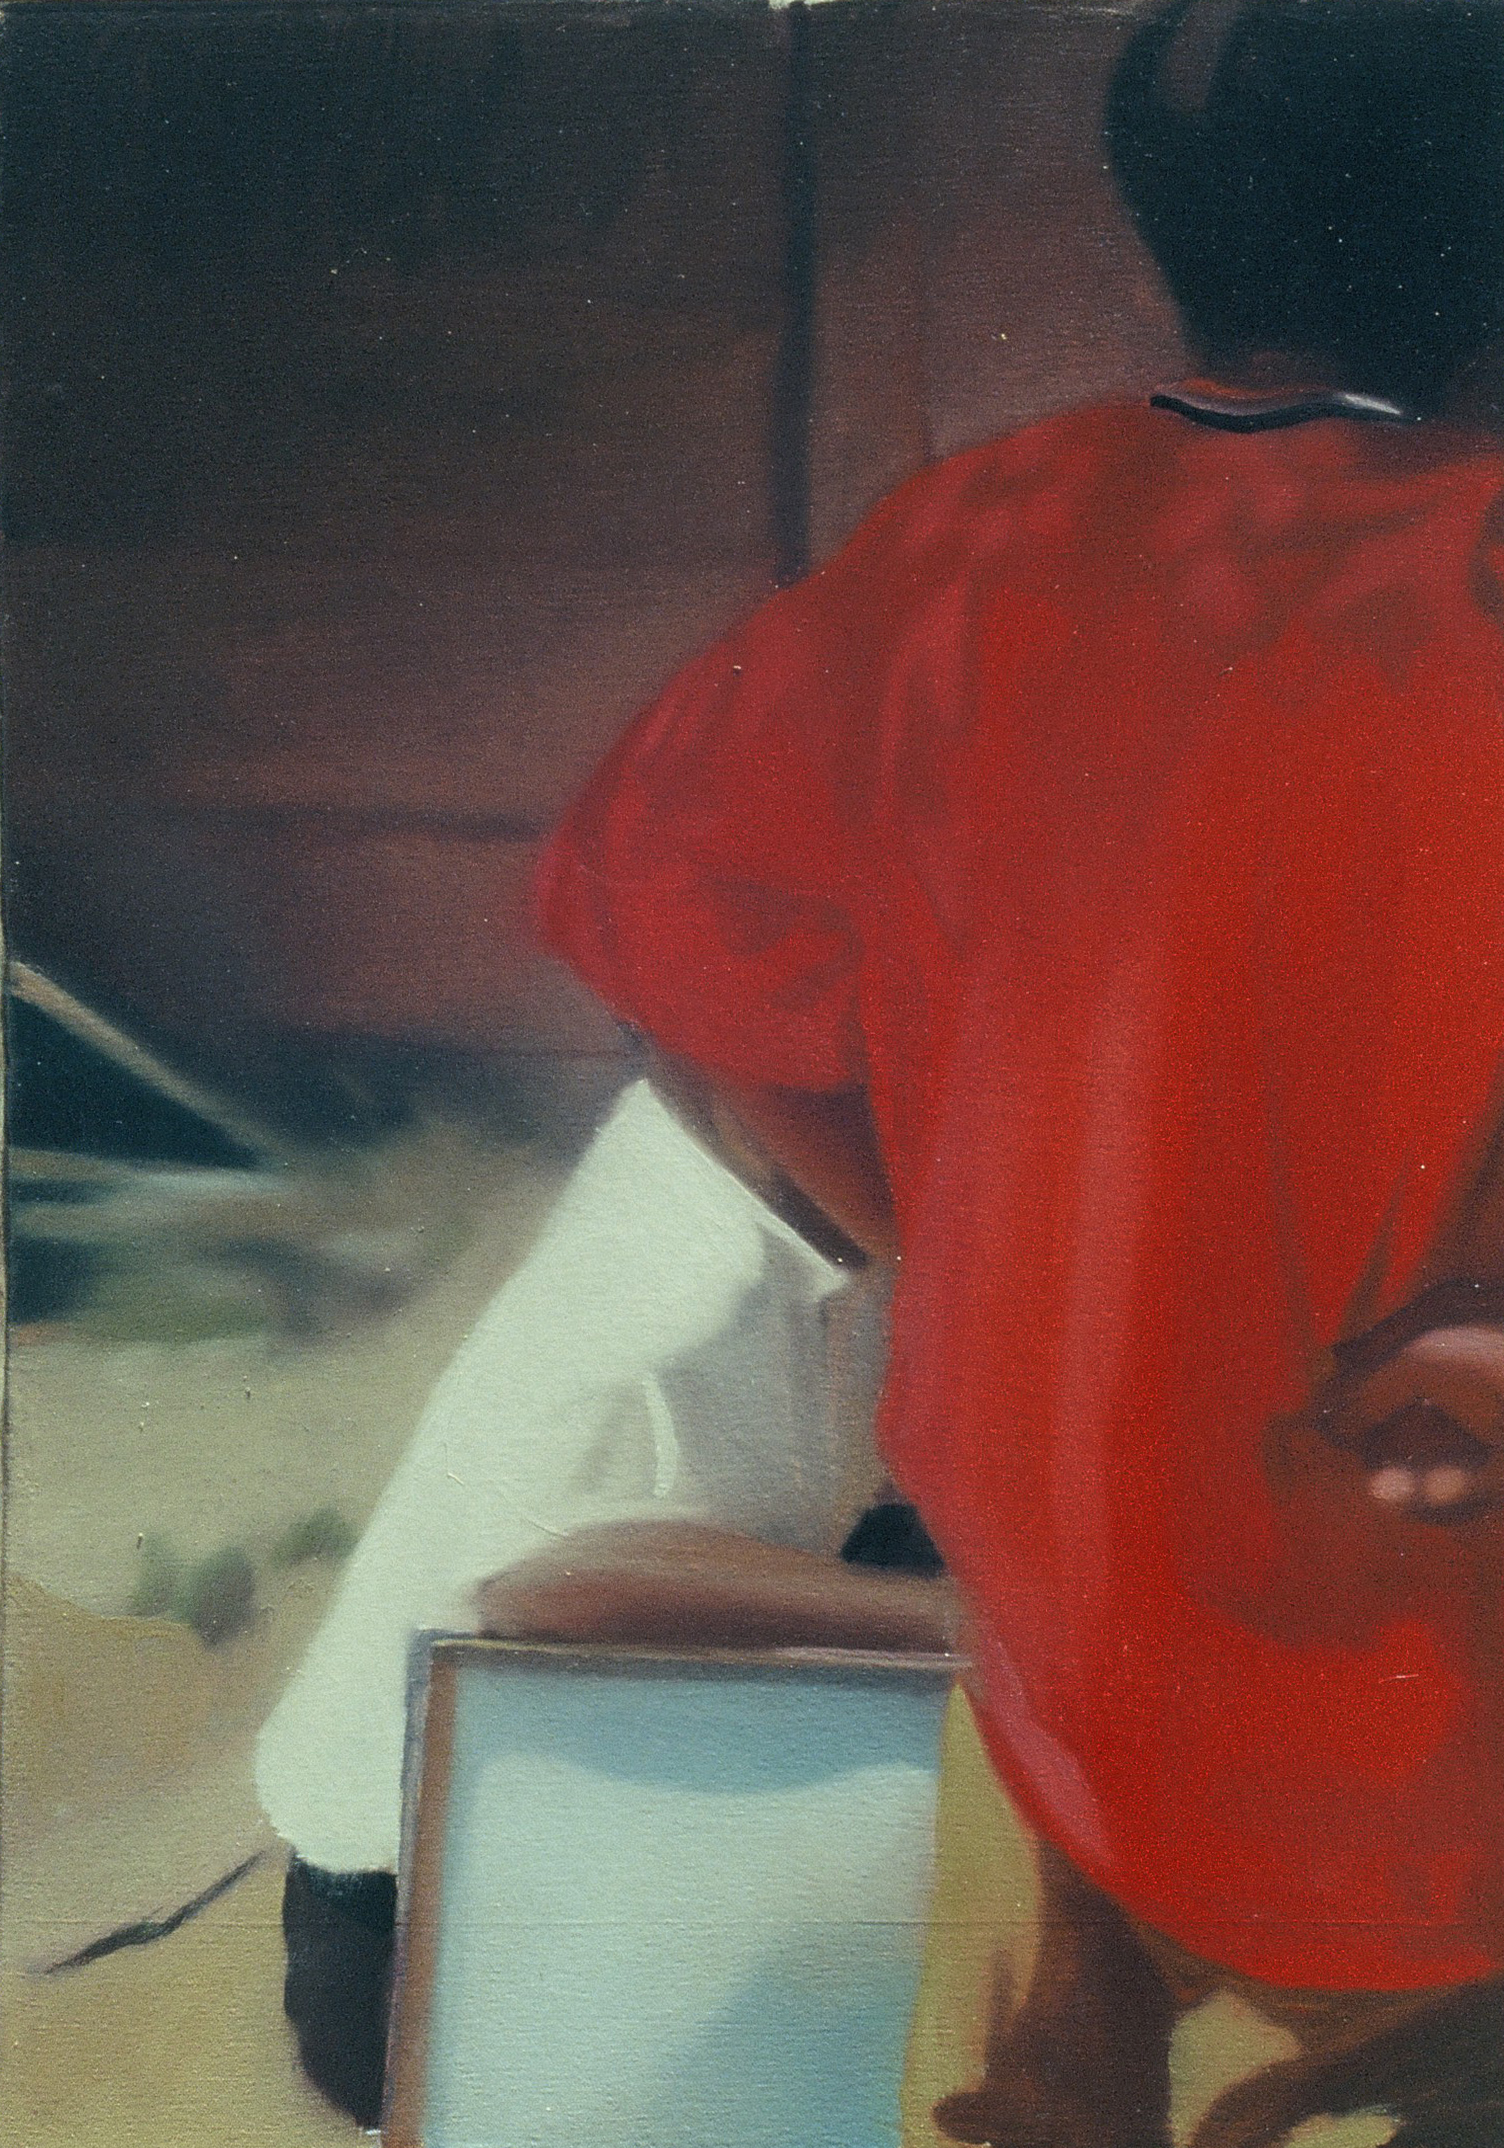   Untitled , 2001, oil on canvas, 60 x 40cm. Private collection, Zimbabwe 